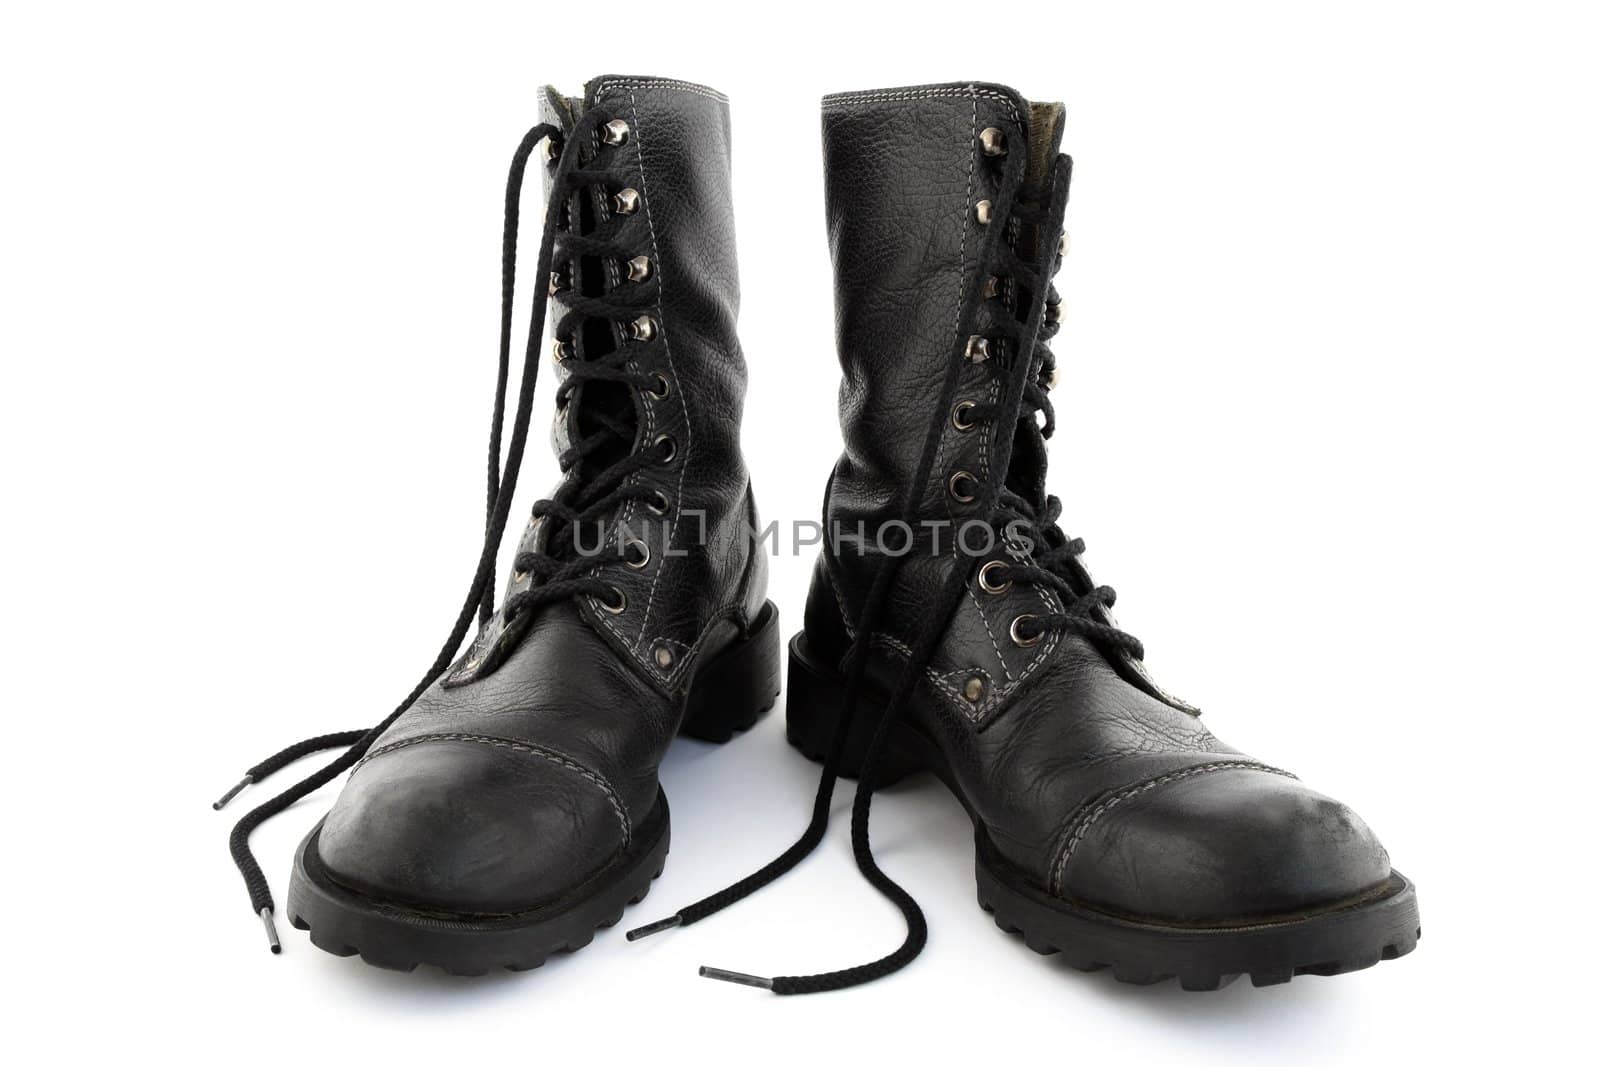 Army style black leather boots with long laces.